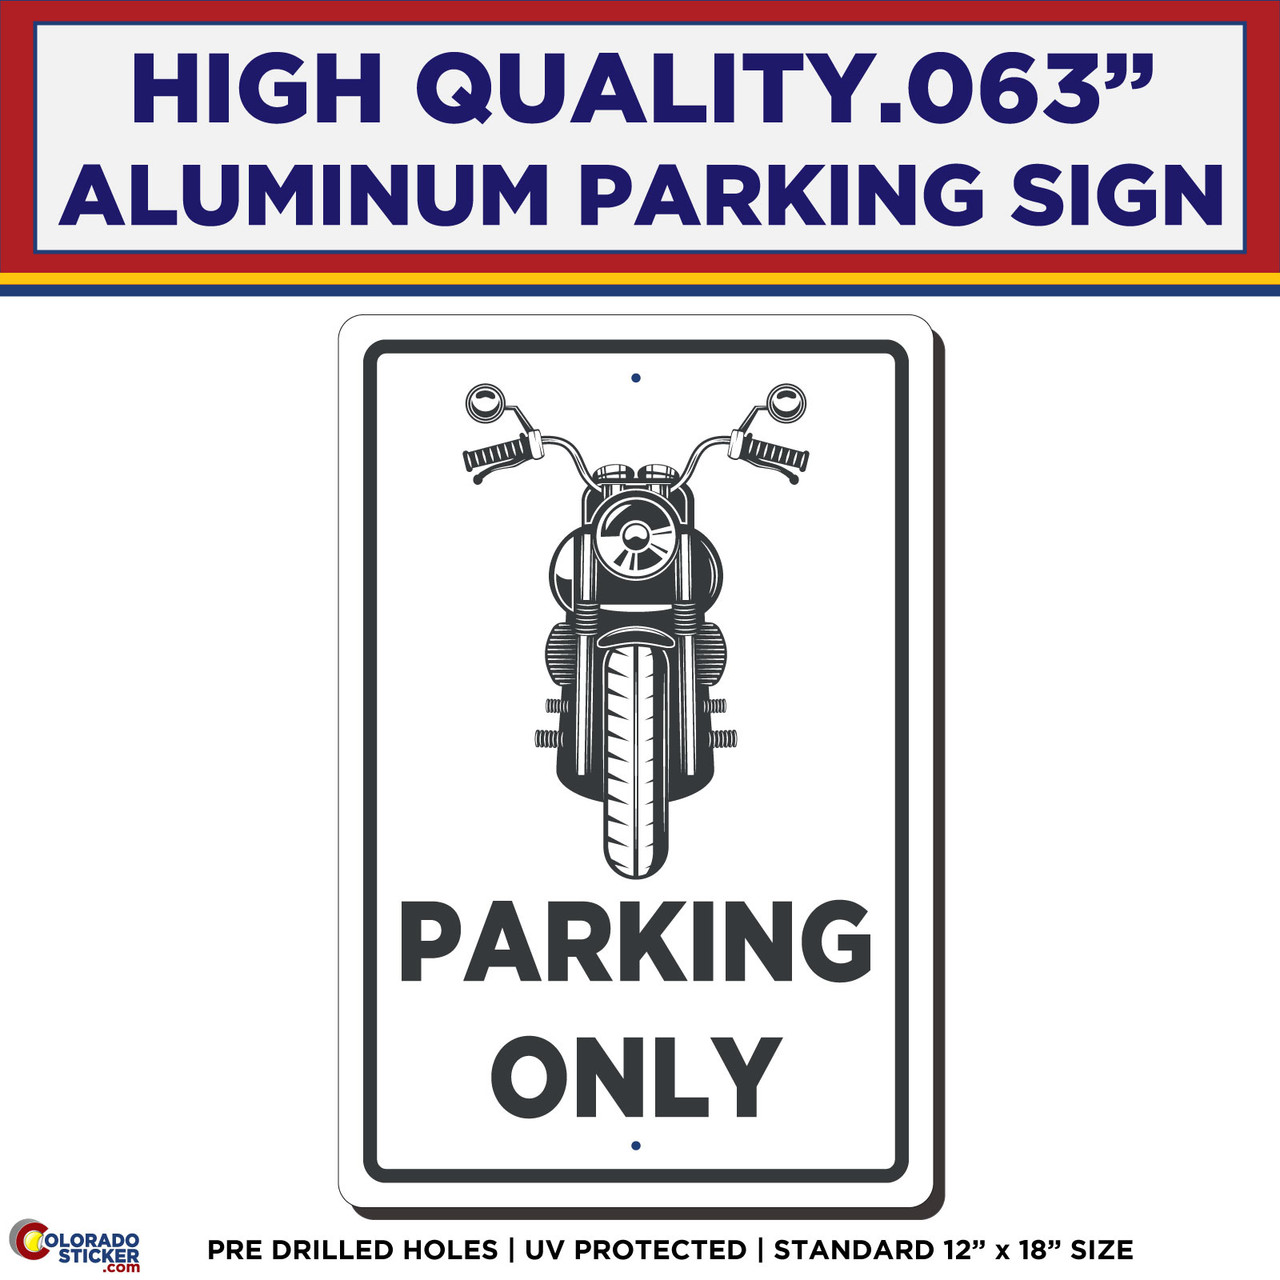 Motorcycle Parking Only Aluminum Sign